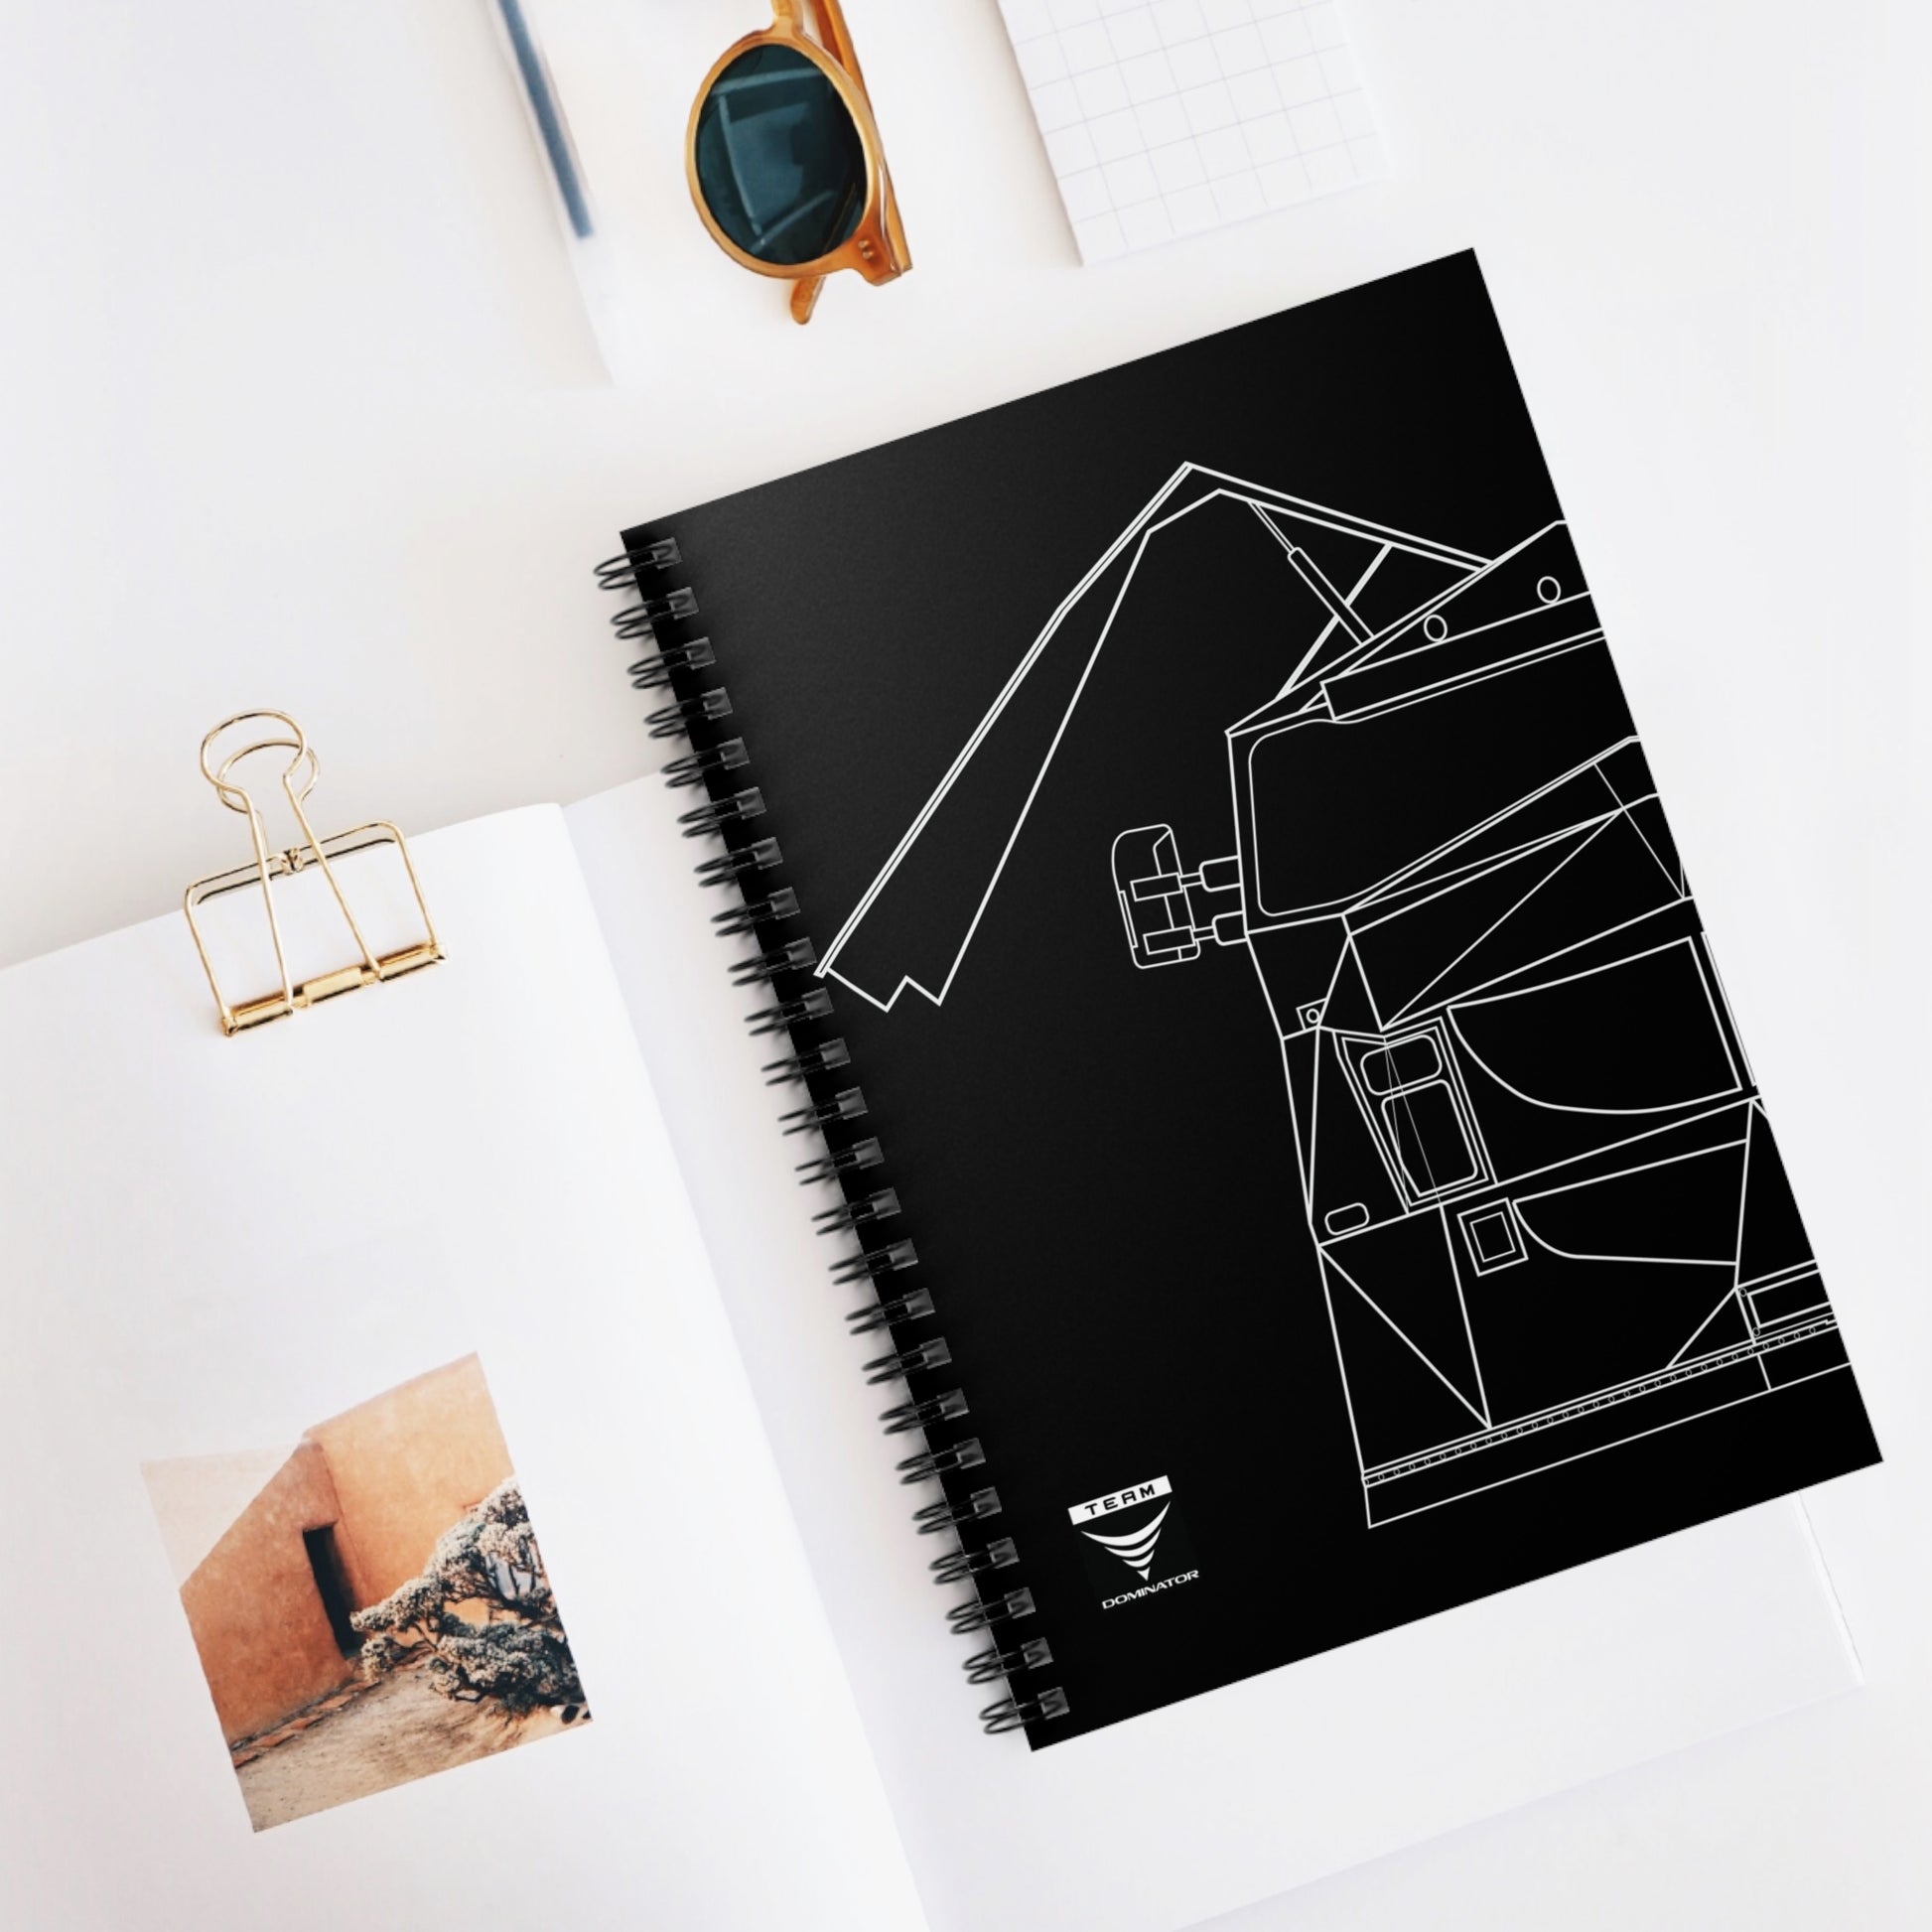 DOMINATOR WIREFRAME NOTEBOOK - Never Stop Chasing